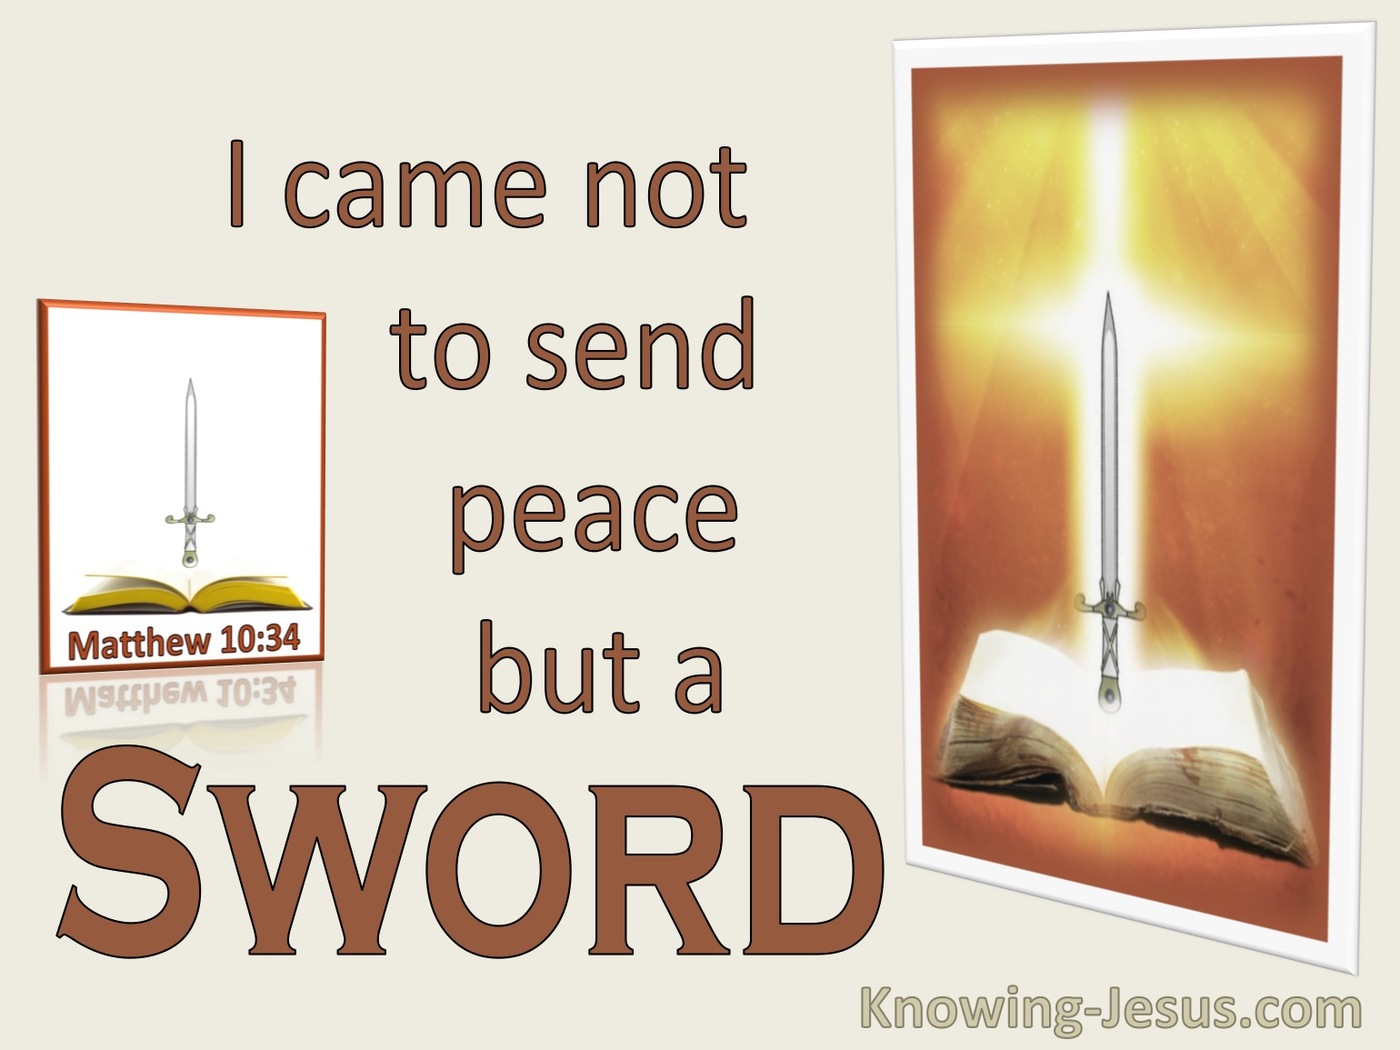 Matthew 10:34 I Came Not To Send Peace But A Sword (utmost)12:19